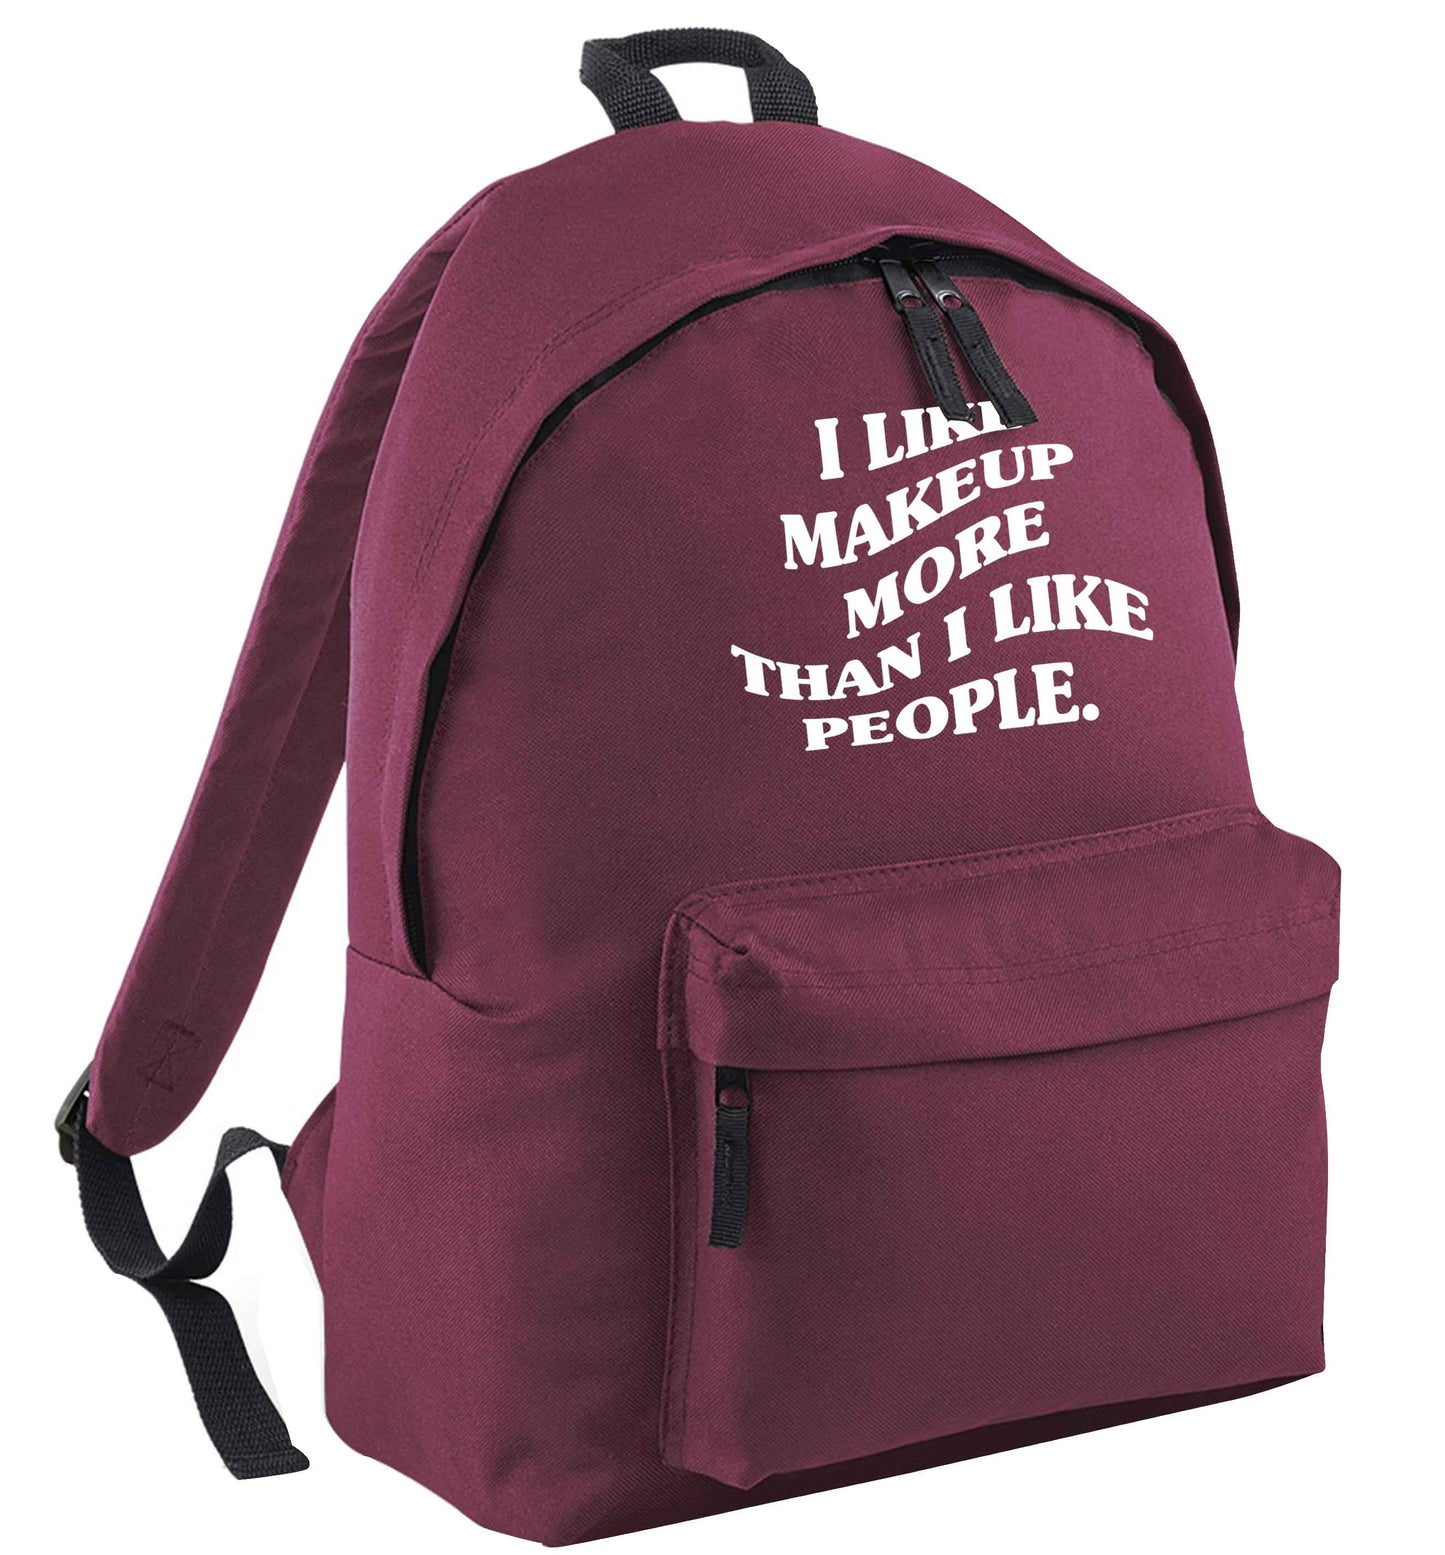 I like makeup more than people maroon adults backpack